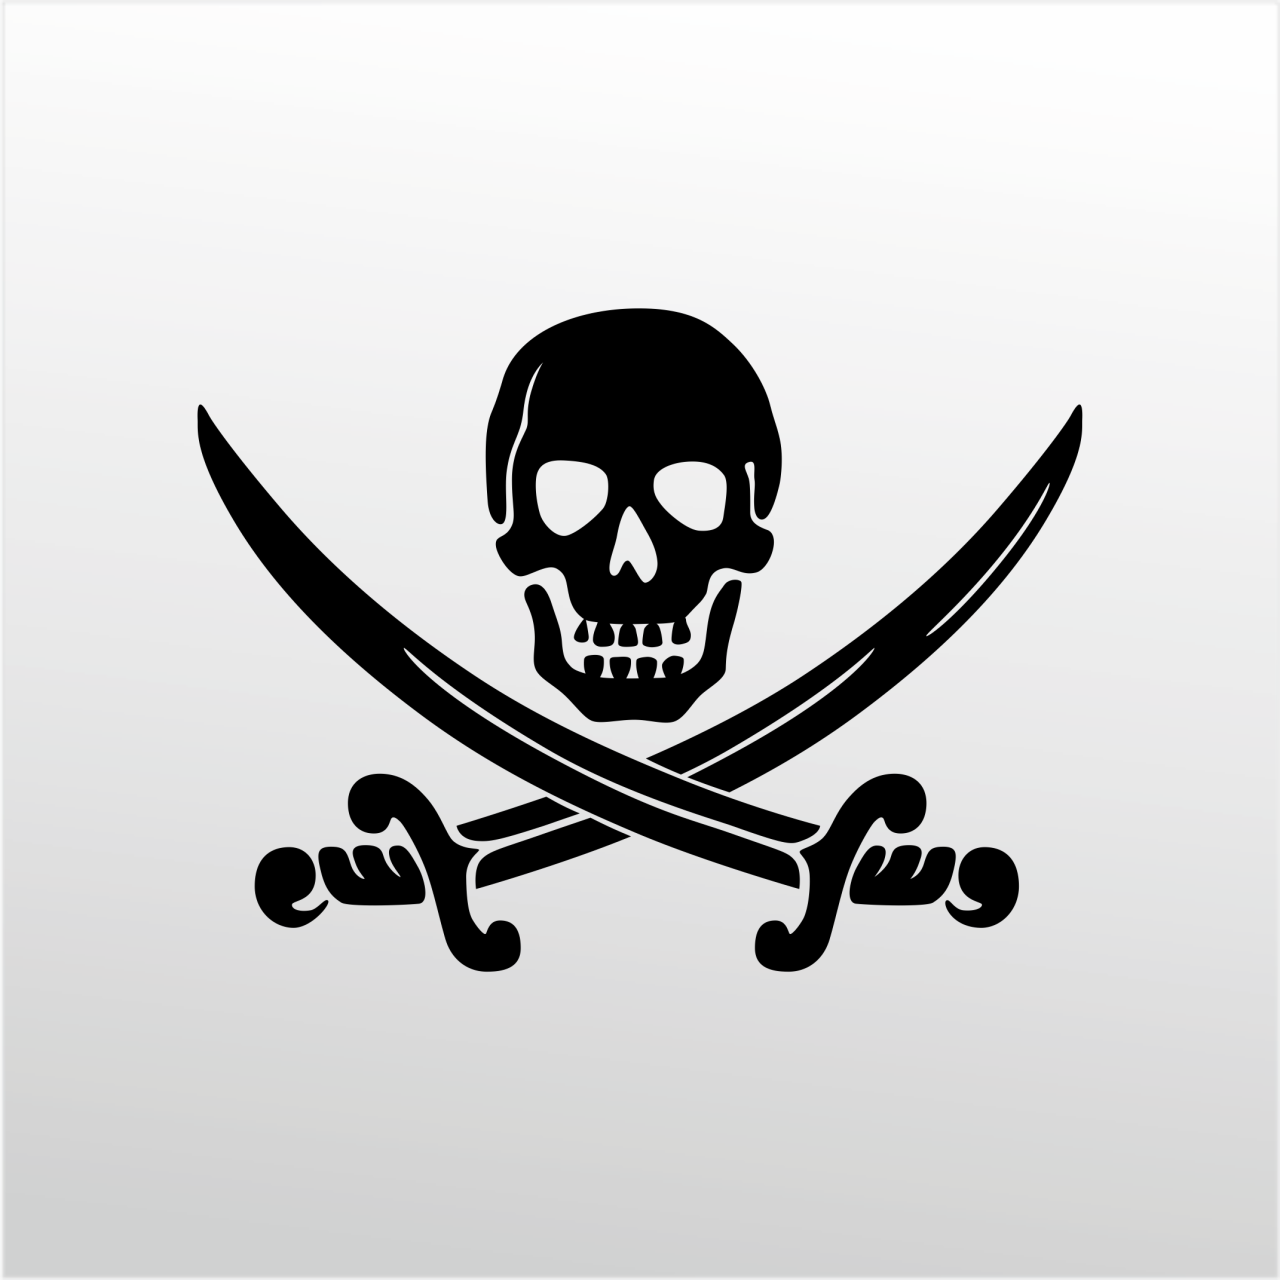 Thumb Image - Pirate Flag Transparent Background - HD Wallpaper 